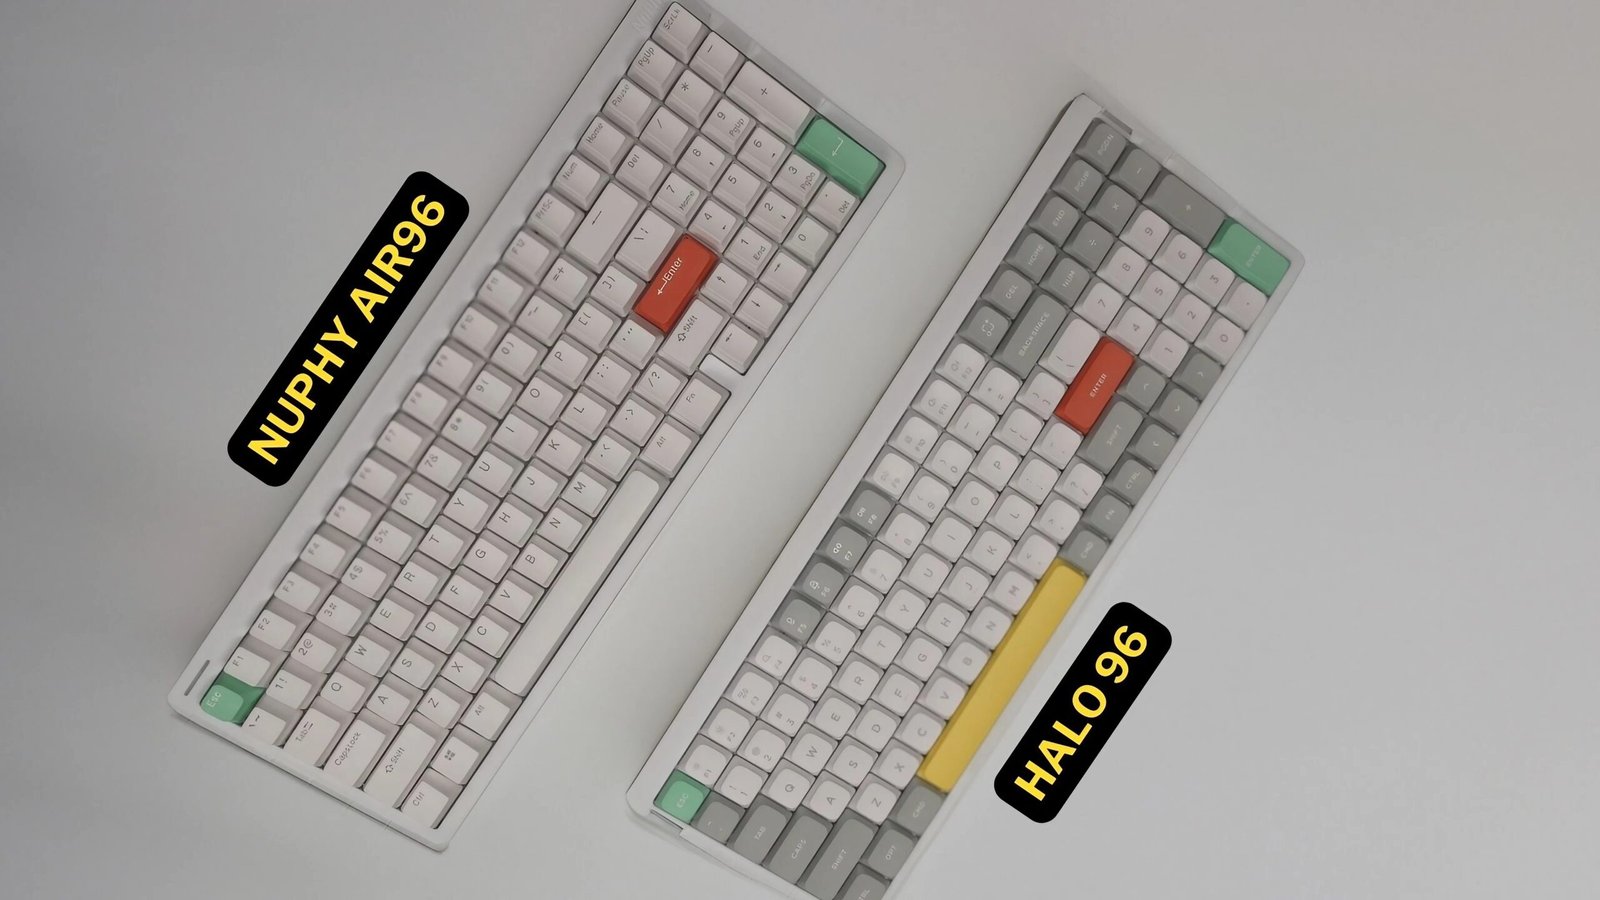 Air96 and Halo96 share Keyboard common features